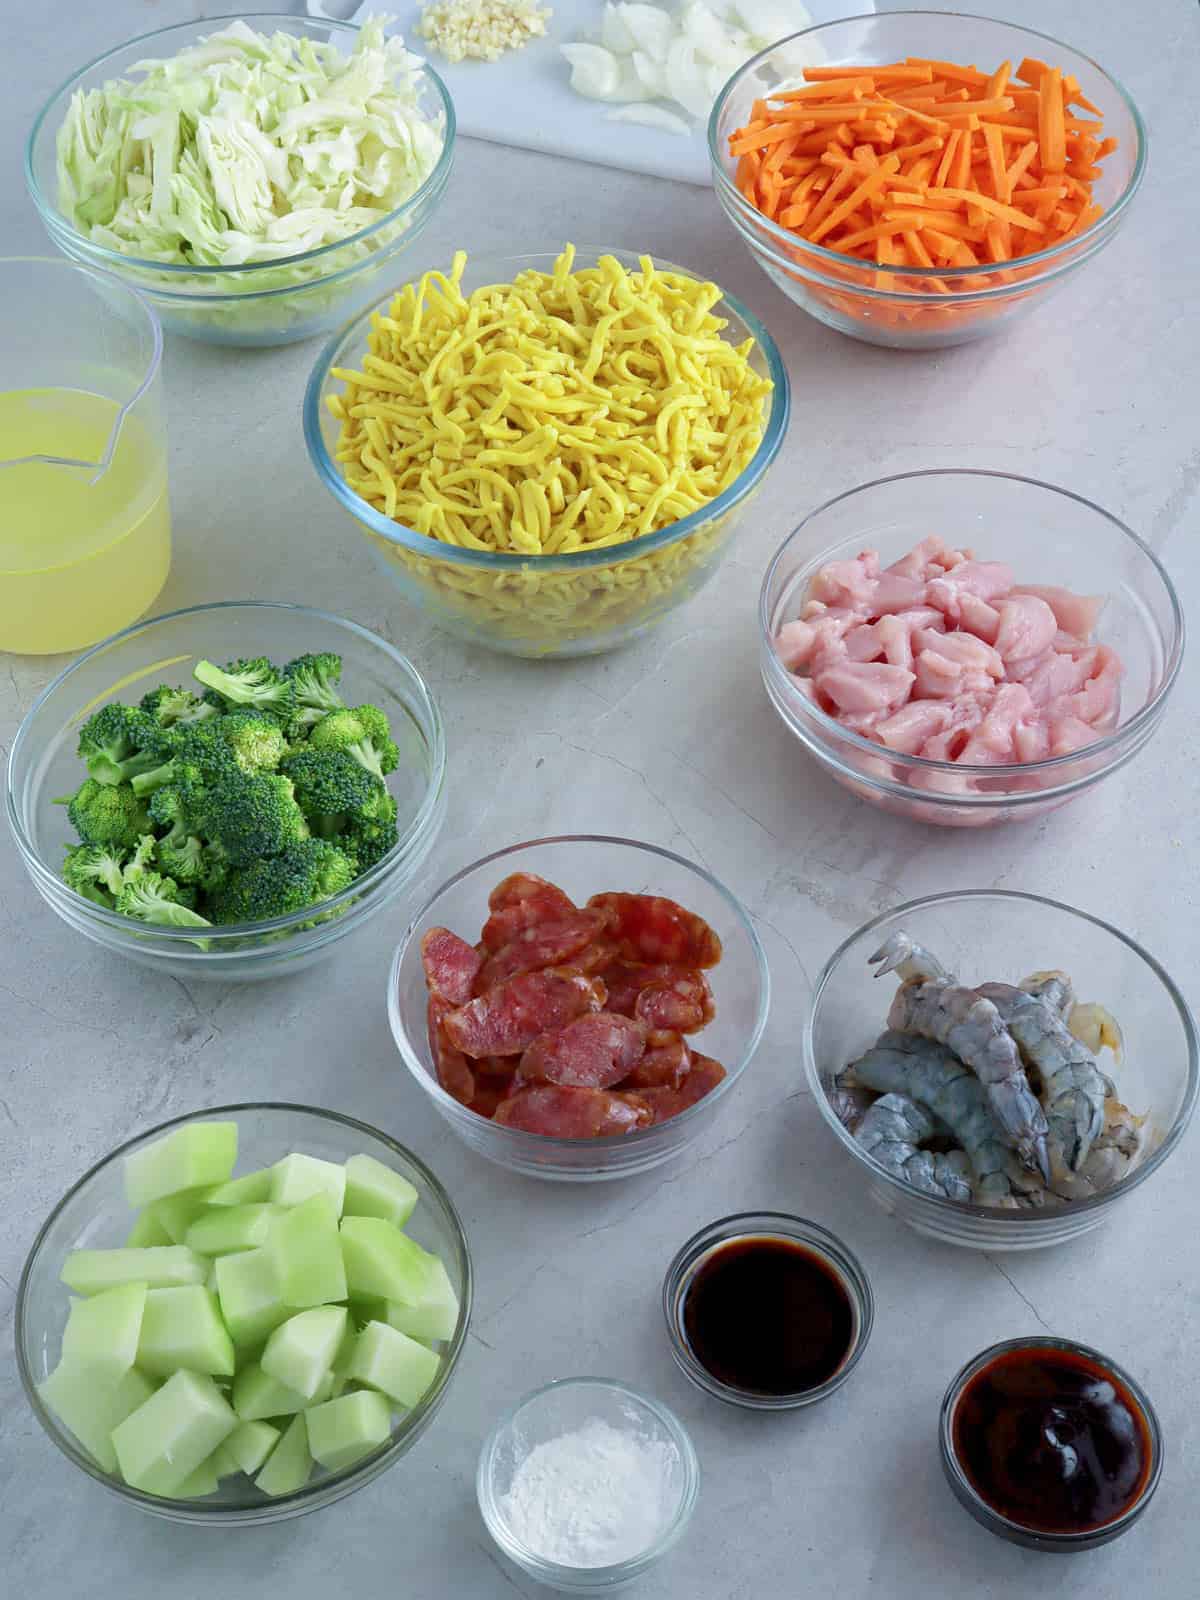 lomi noodles, sliced chicken breasts, broccoli florets, peeled shrimp, julienned carrots, chopped onions, sliced chayote, sliced Chinese sausage in individual bowls